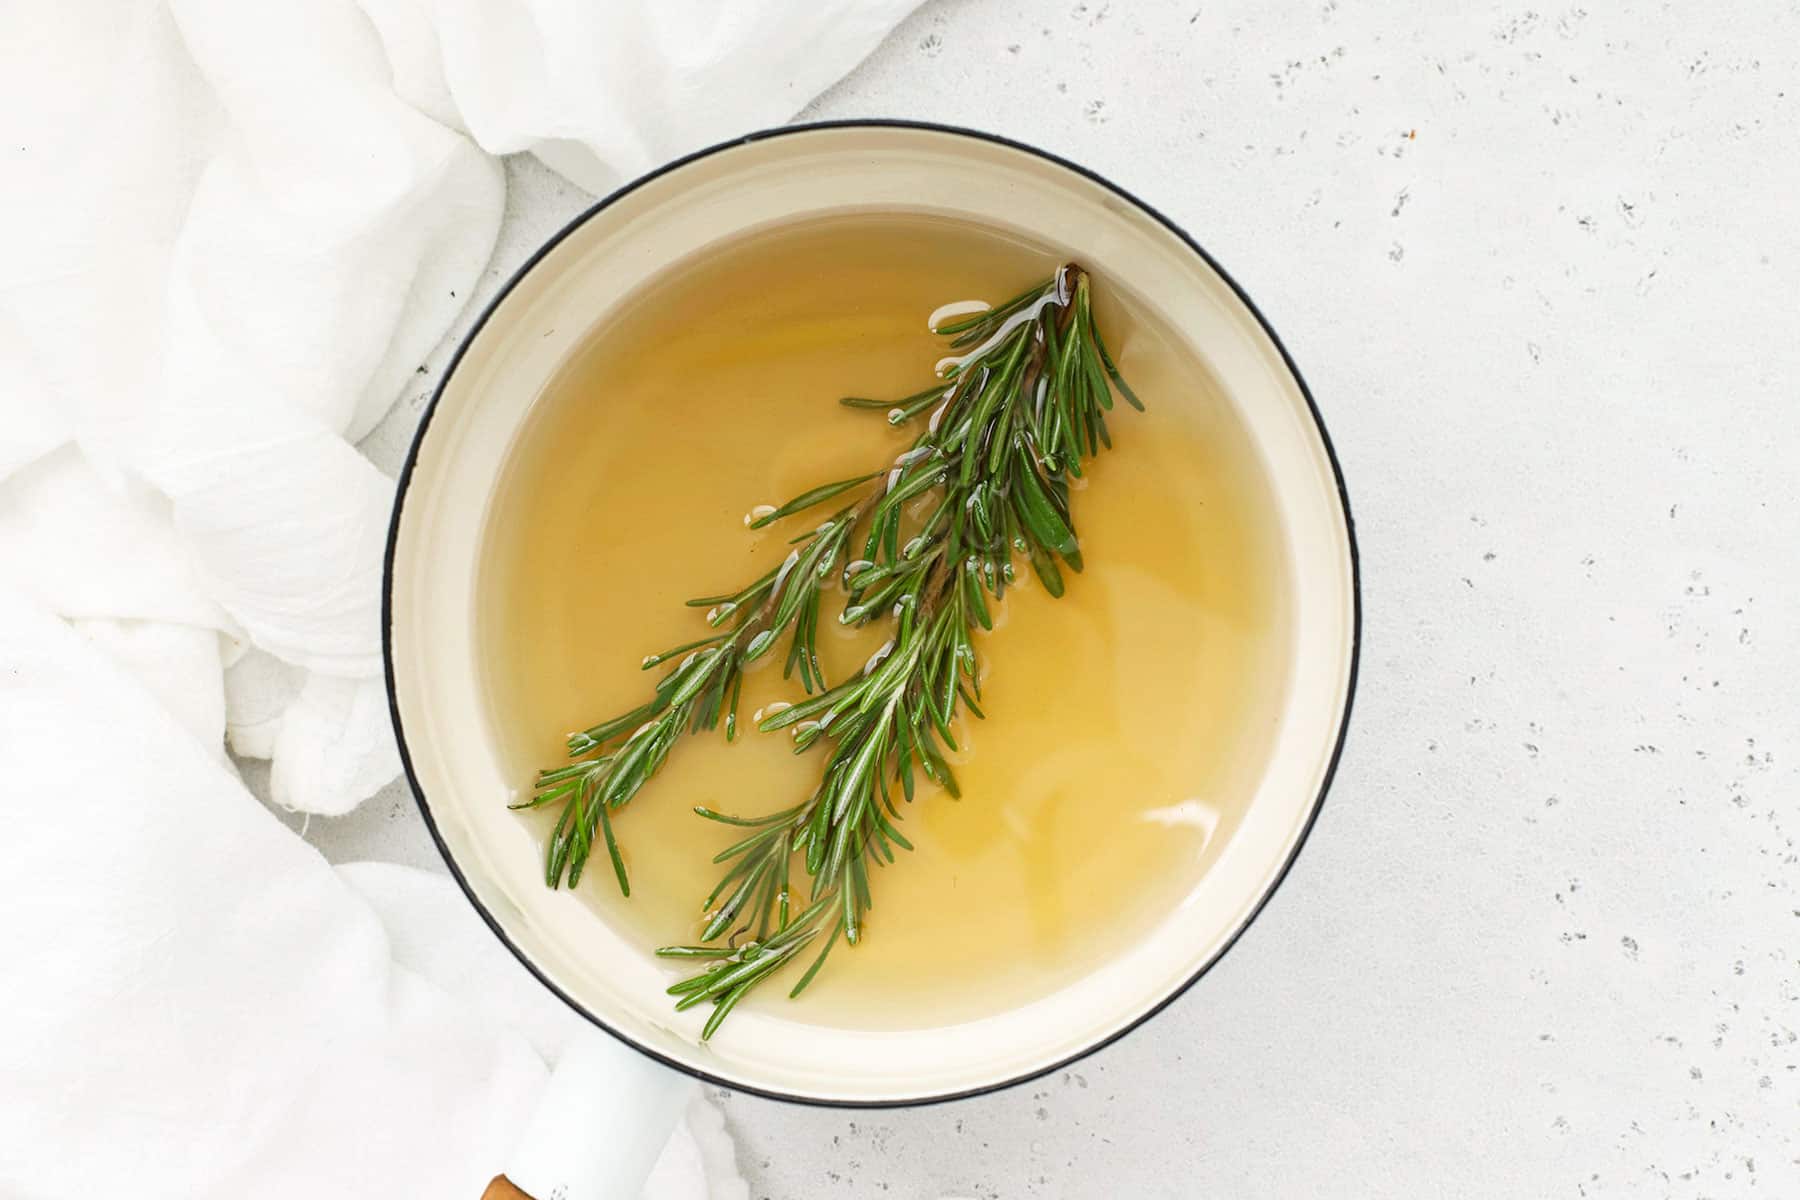 Steeping fresh rosemary in simple syrup